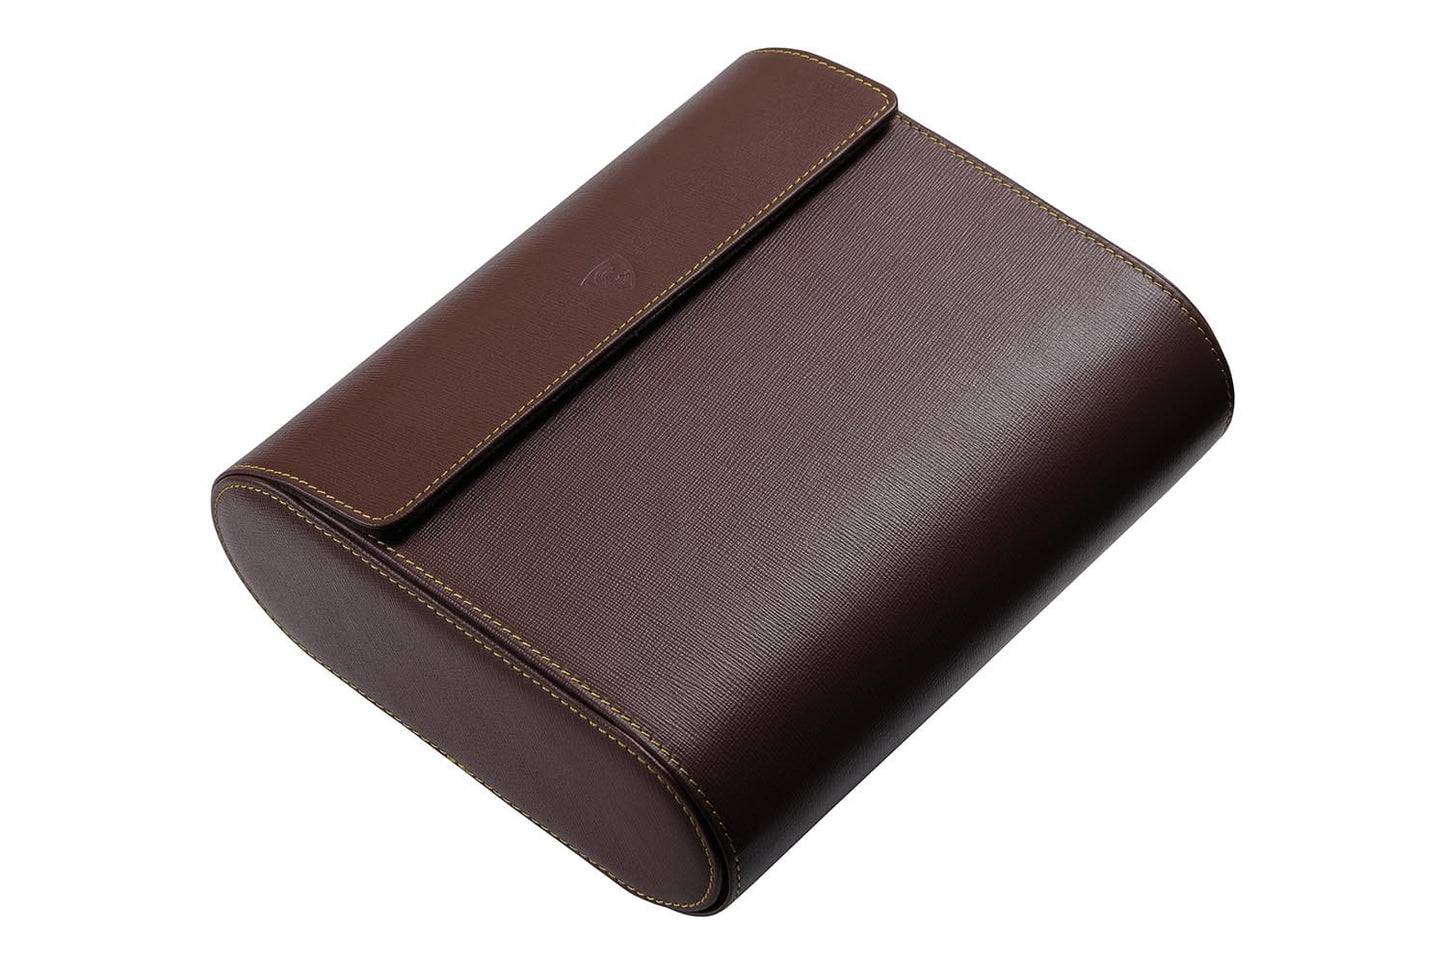 Leather Watch Case for 6 watches - Saffiano Dark Brown / Chocolate